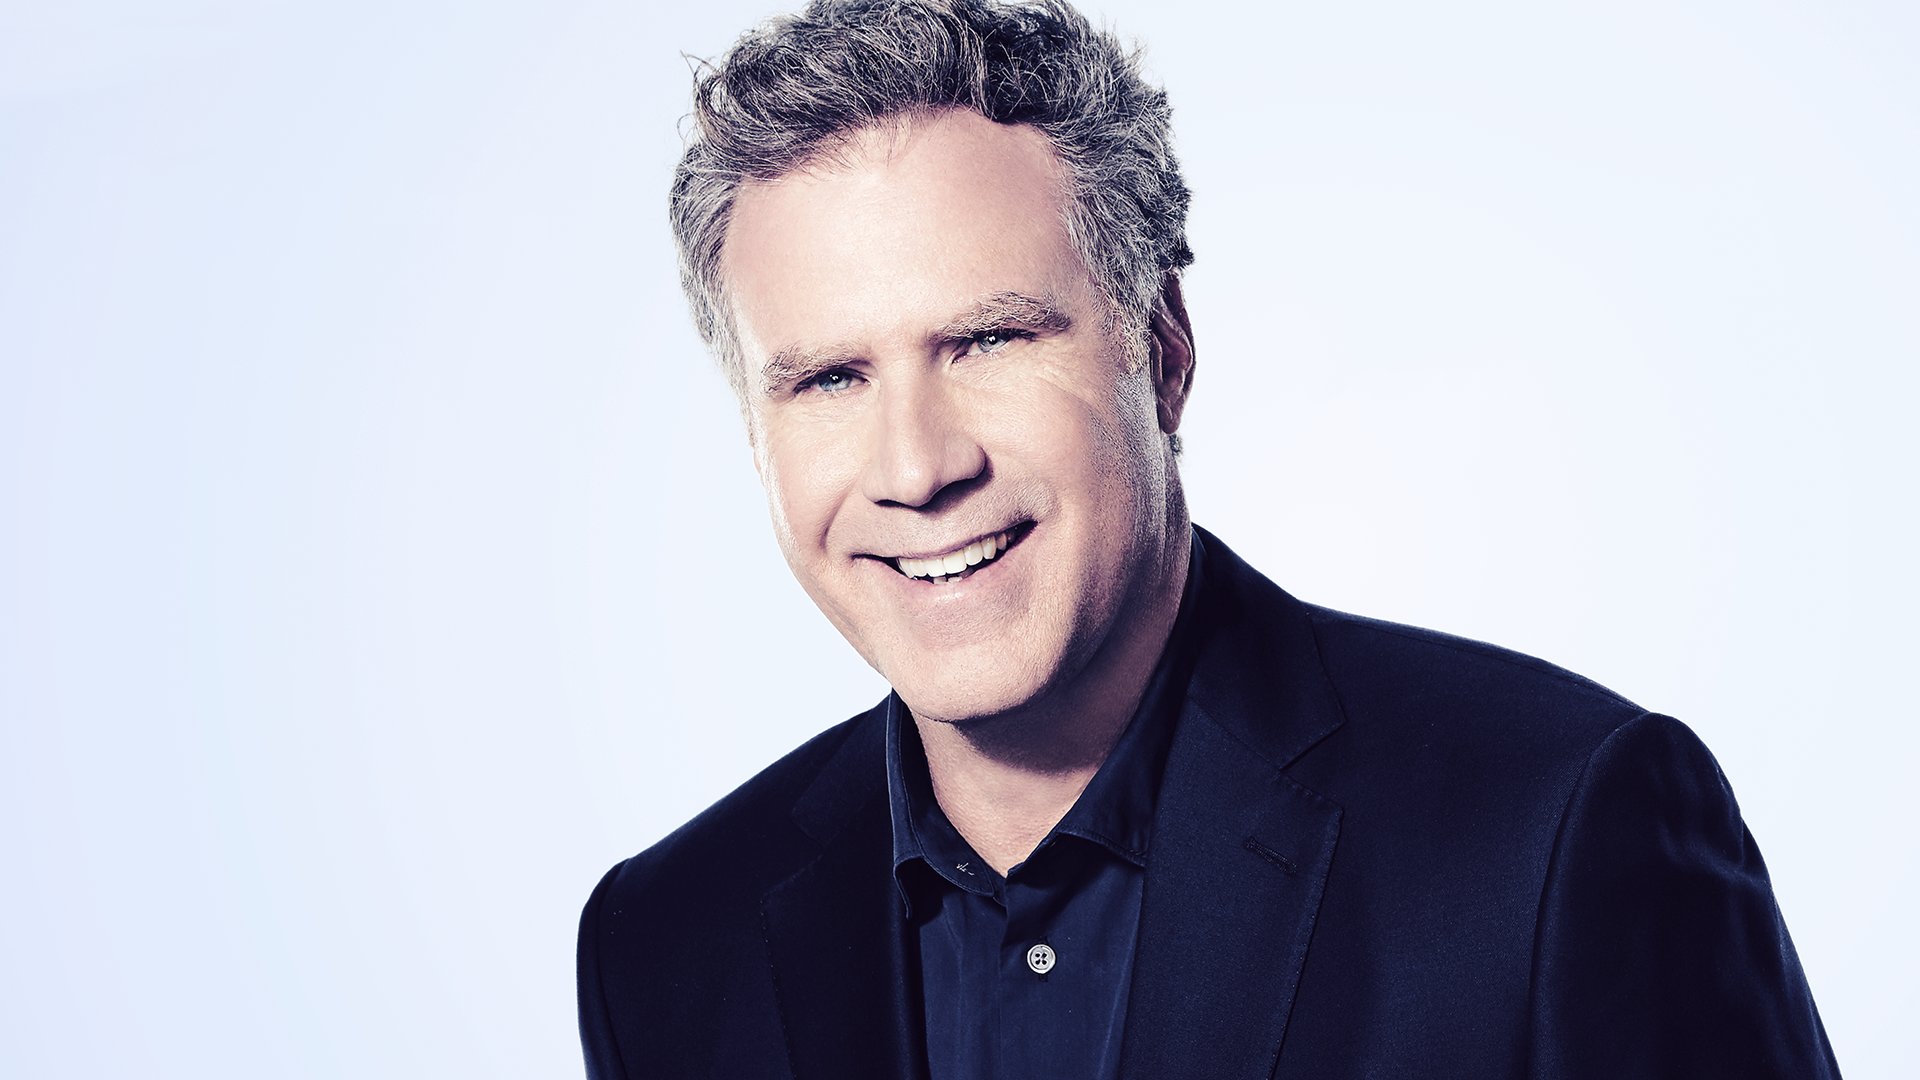 Will Ferrell Links with Netflix for New Comedy Series "Golf"